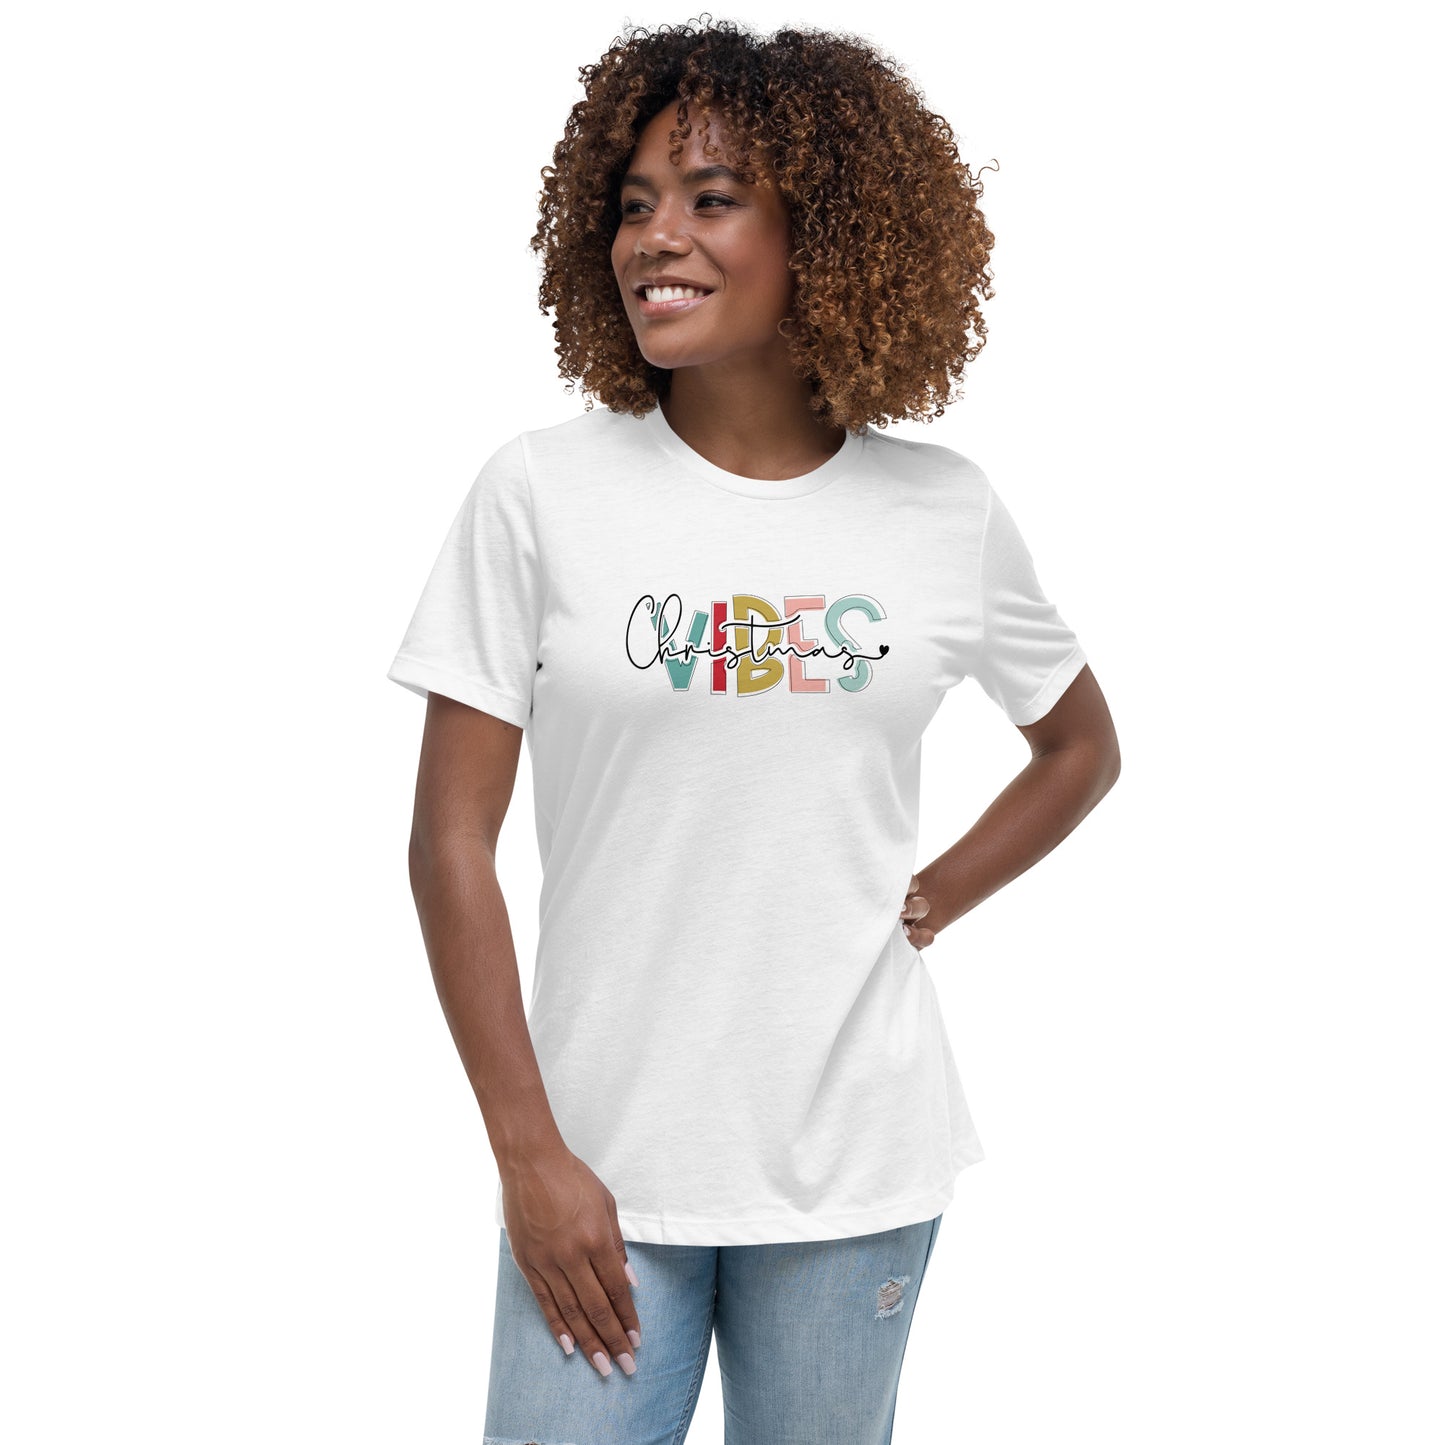 Christmas Vibes Women's Relaxed T-Shirt